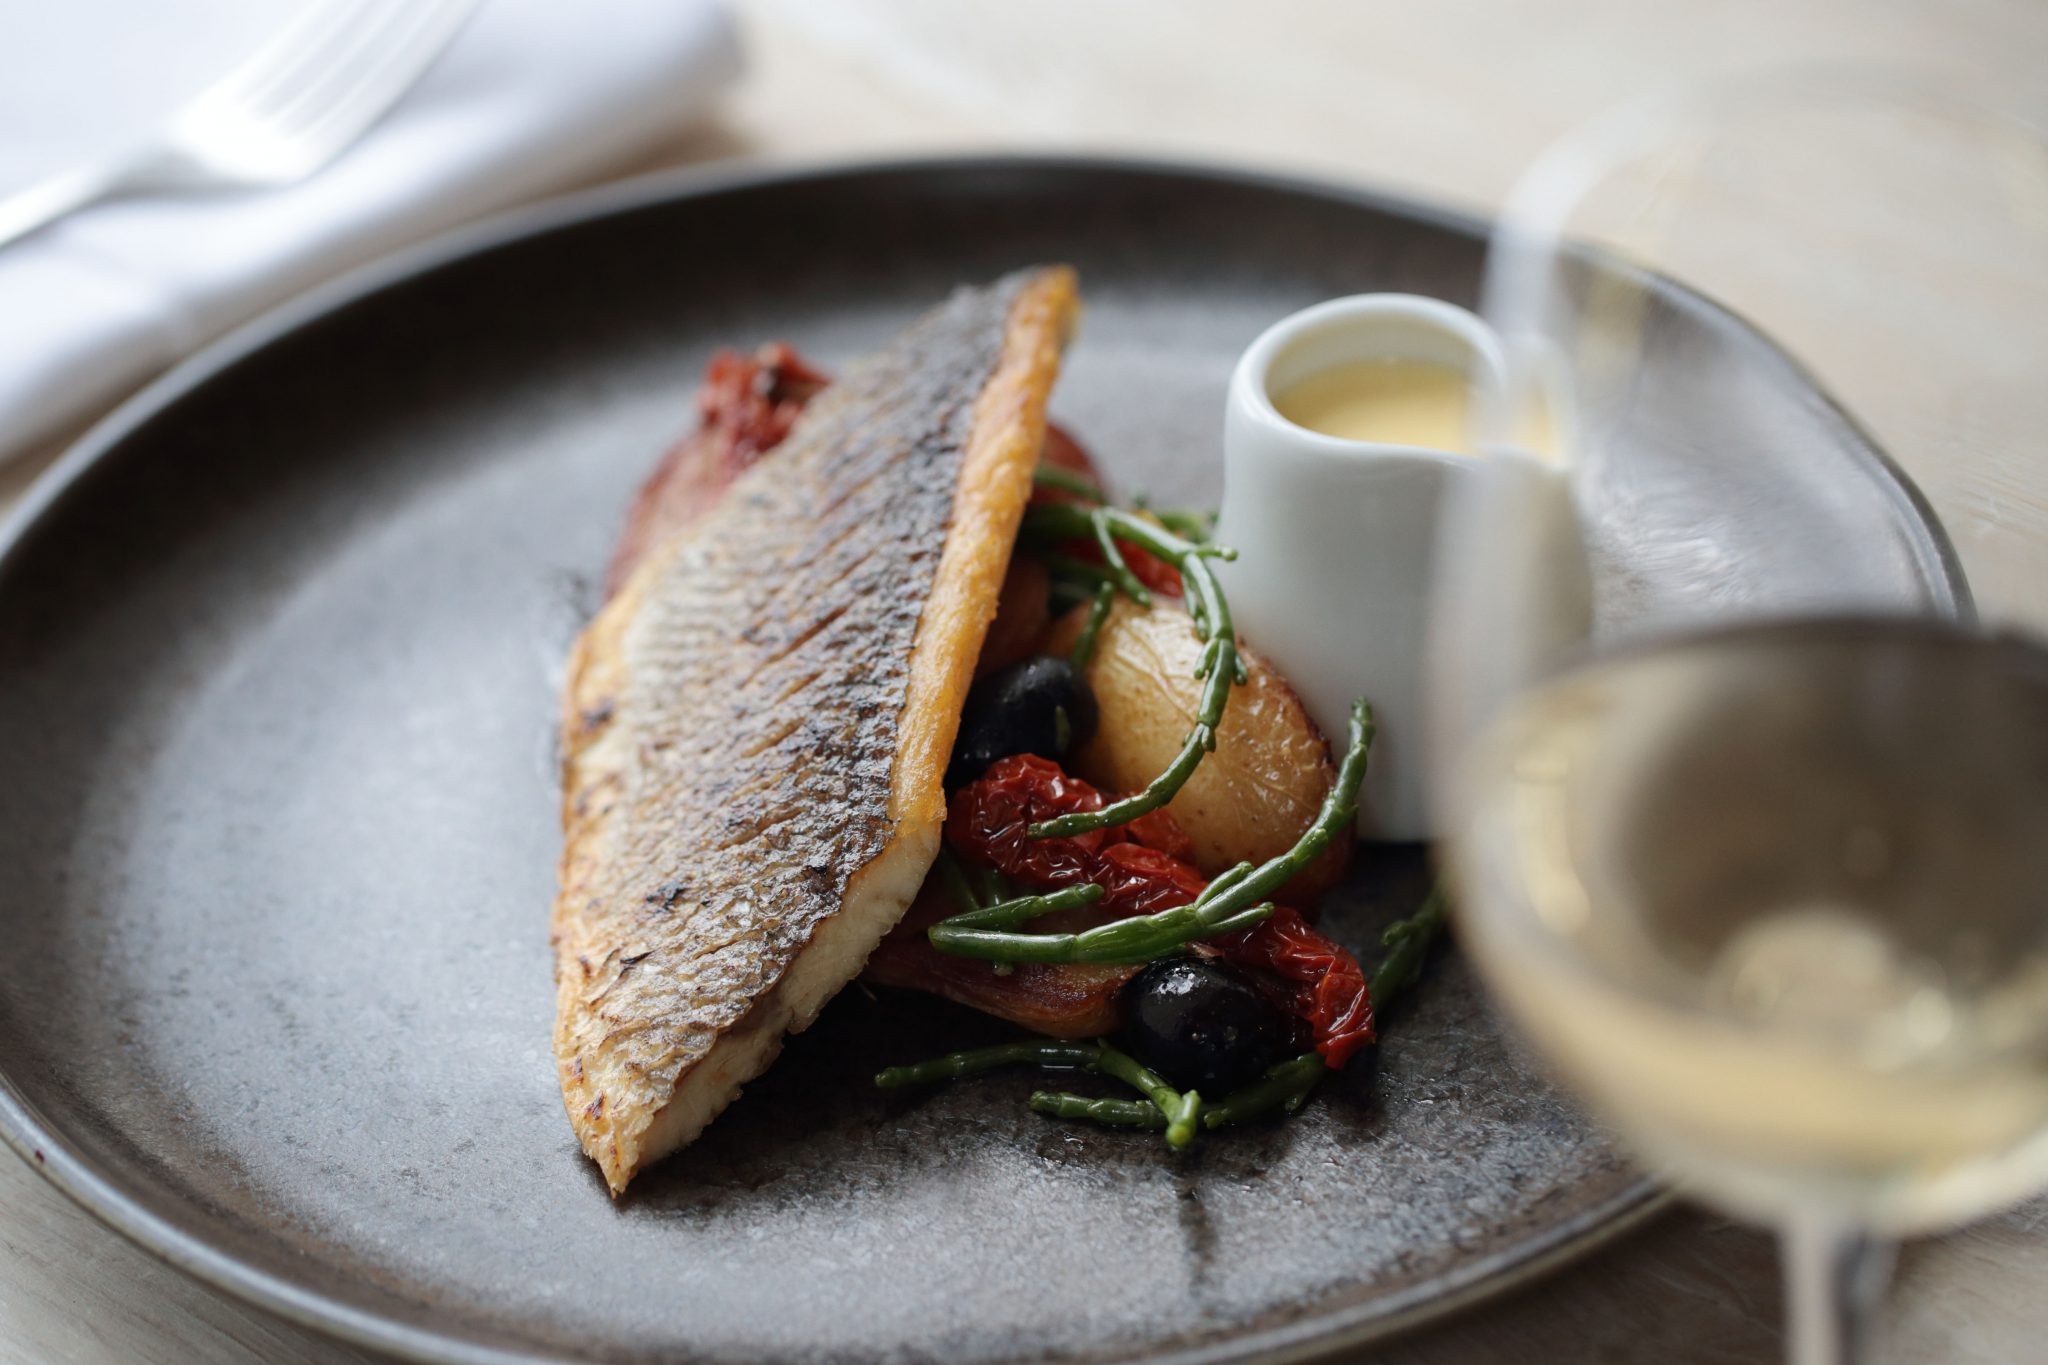 Fillet of seabass, Italian new potatoes, baby tomato, olive, rocket and butter sauce